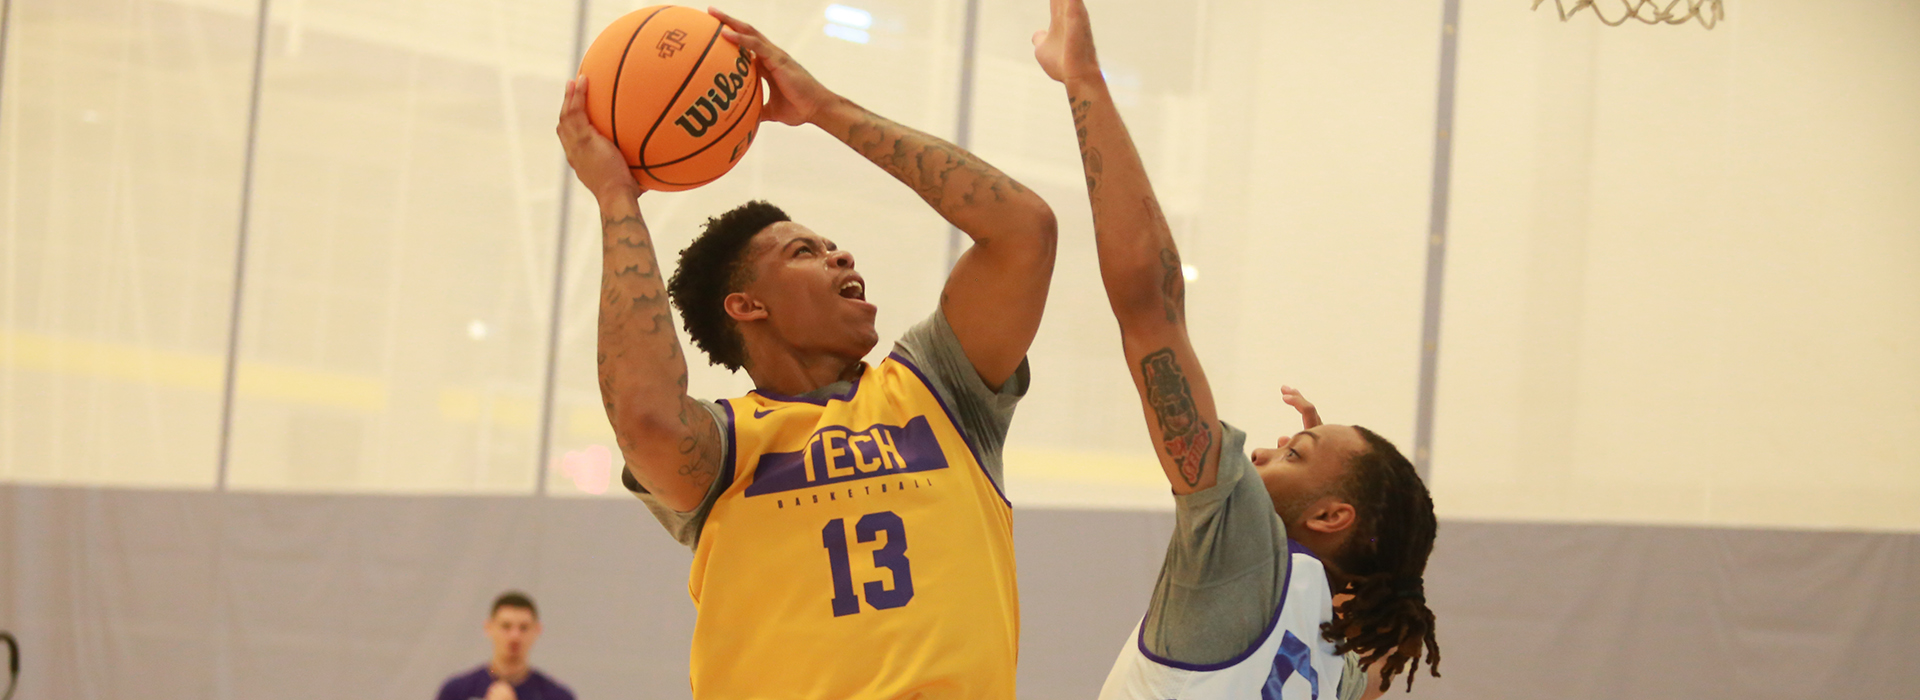 Golden Eagles host Cumberland in Thursday exhibition as part of Purple Palooza